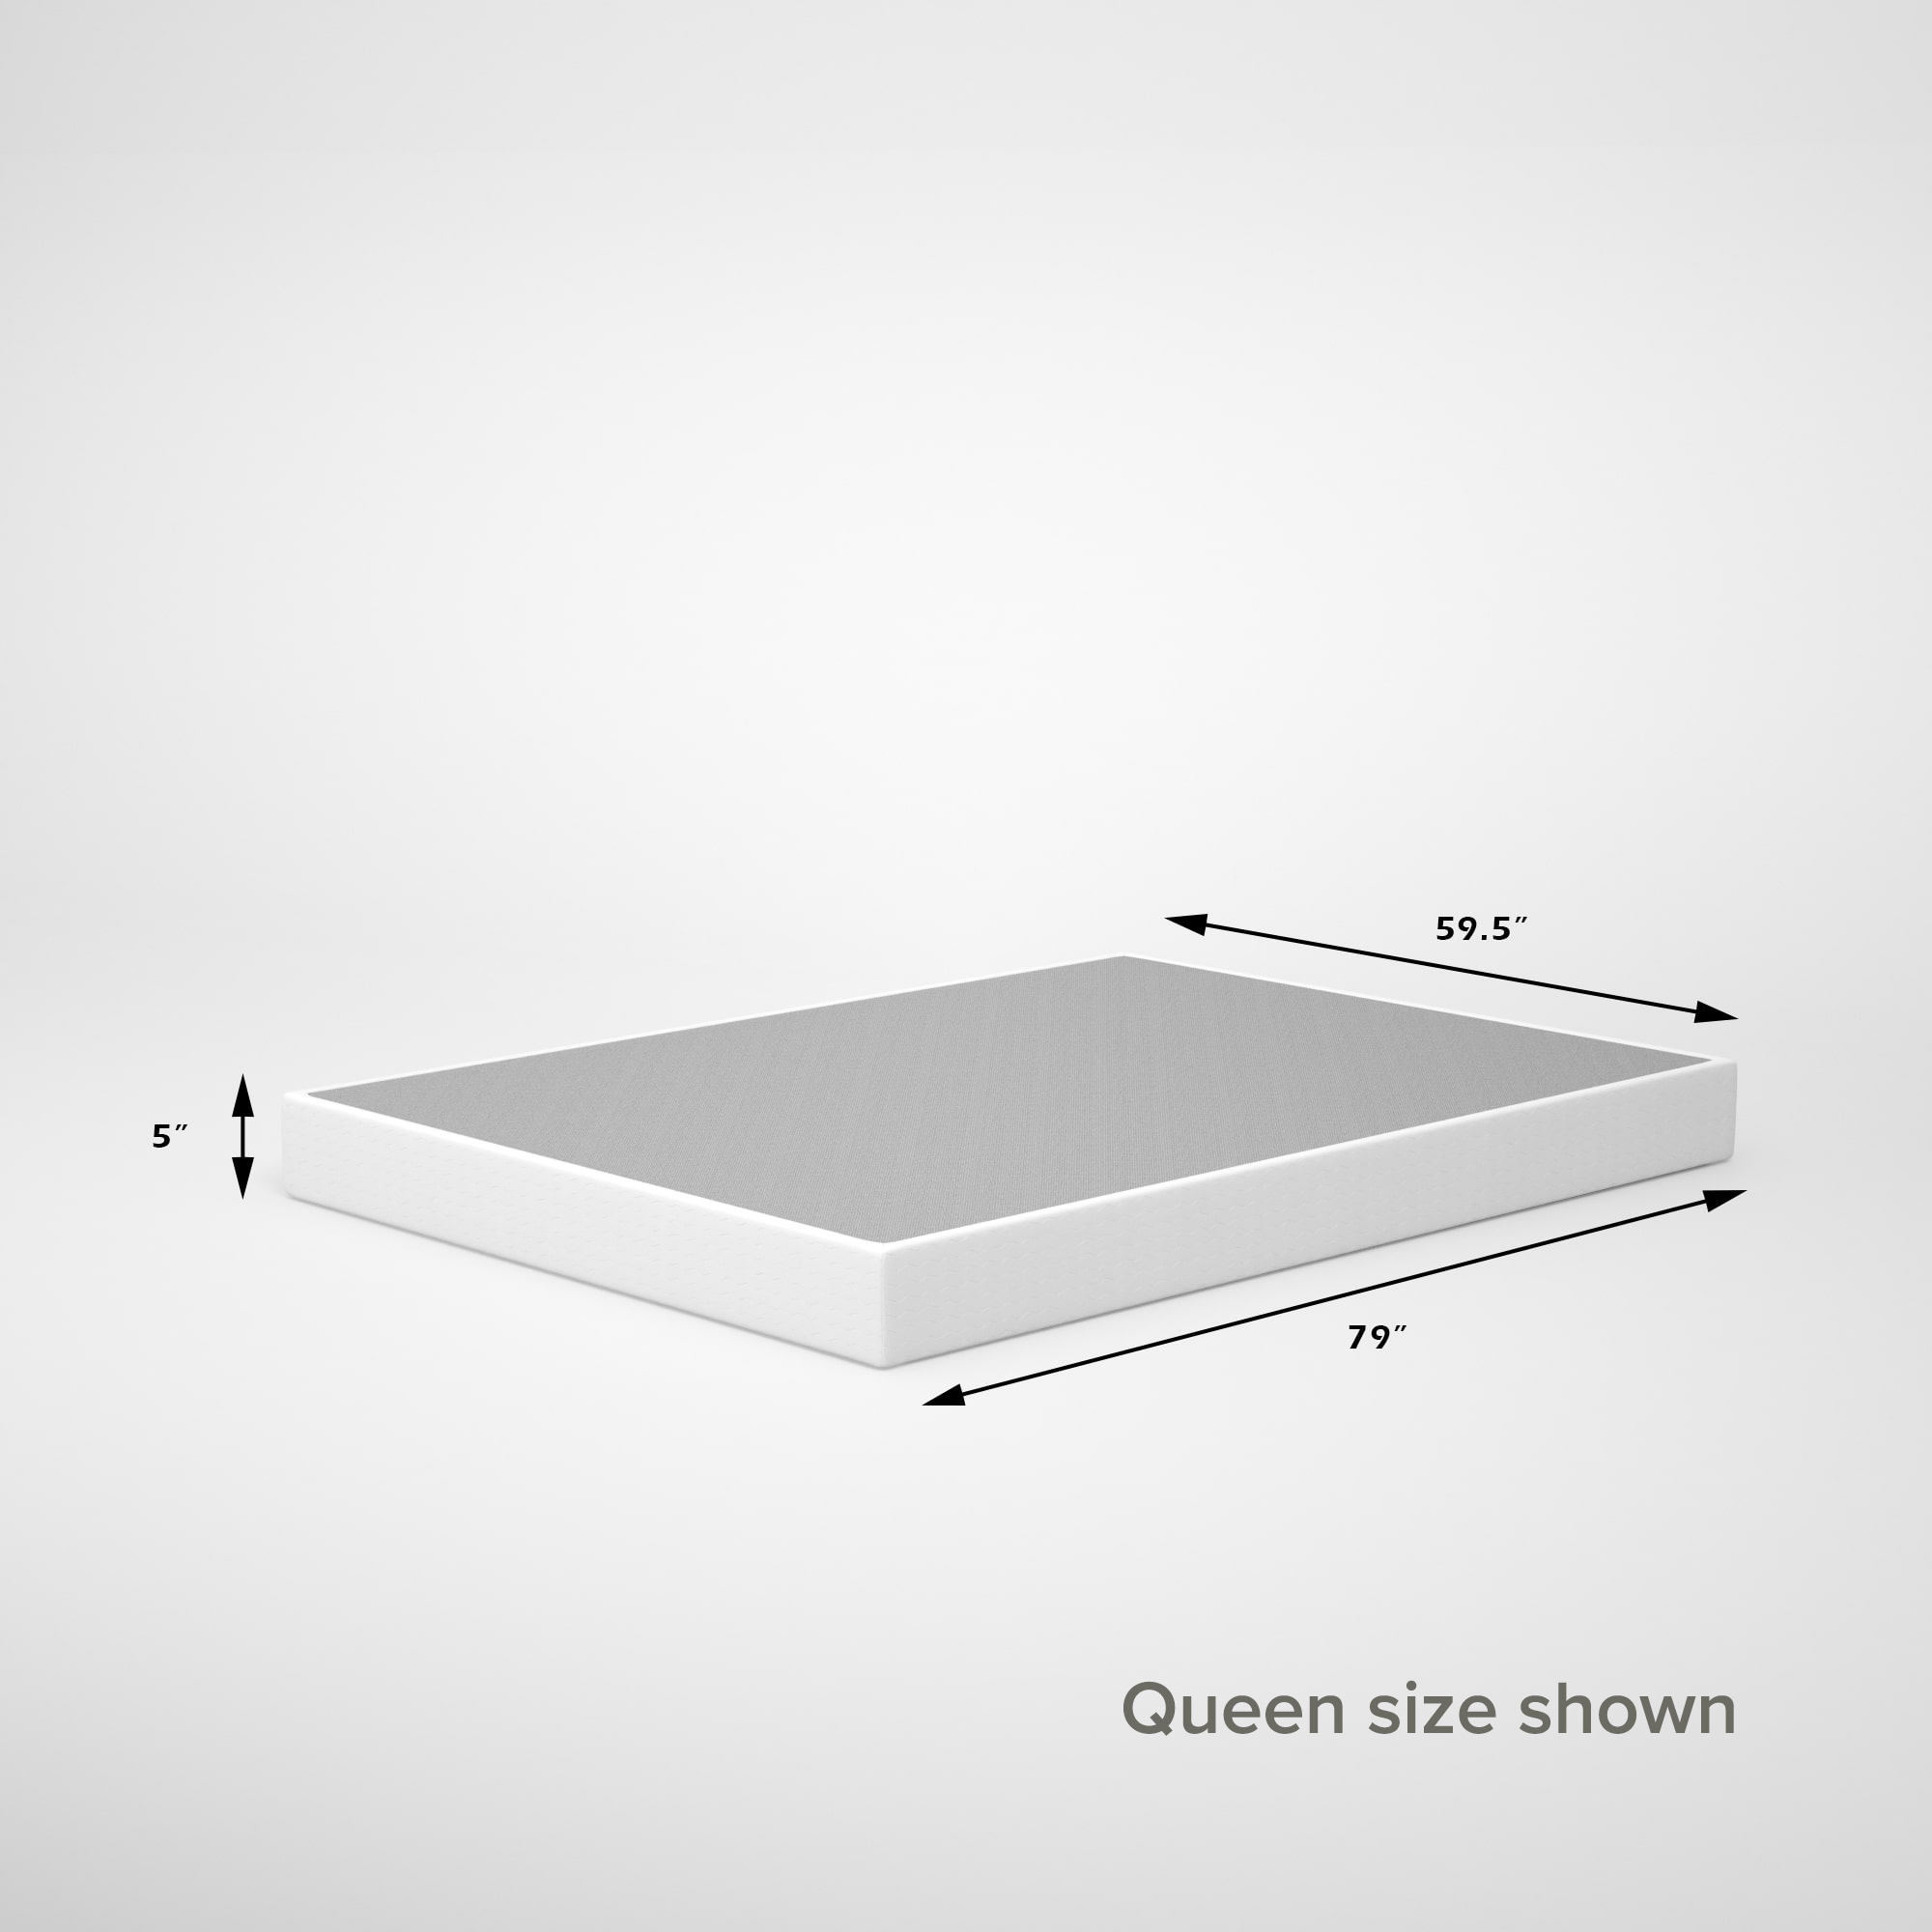 Smart Metal Box Spring 5 inch queen size dimensions shown